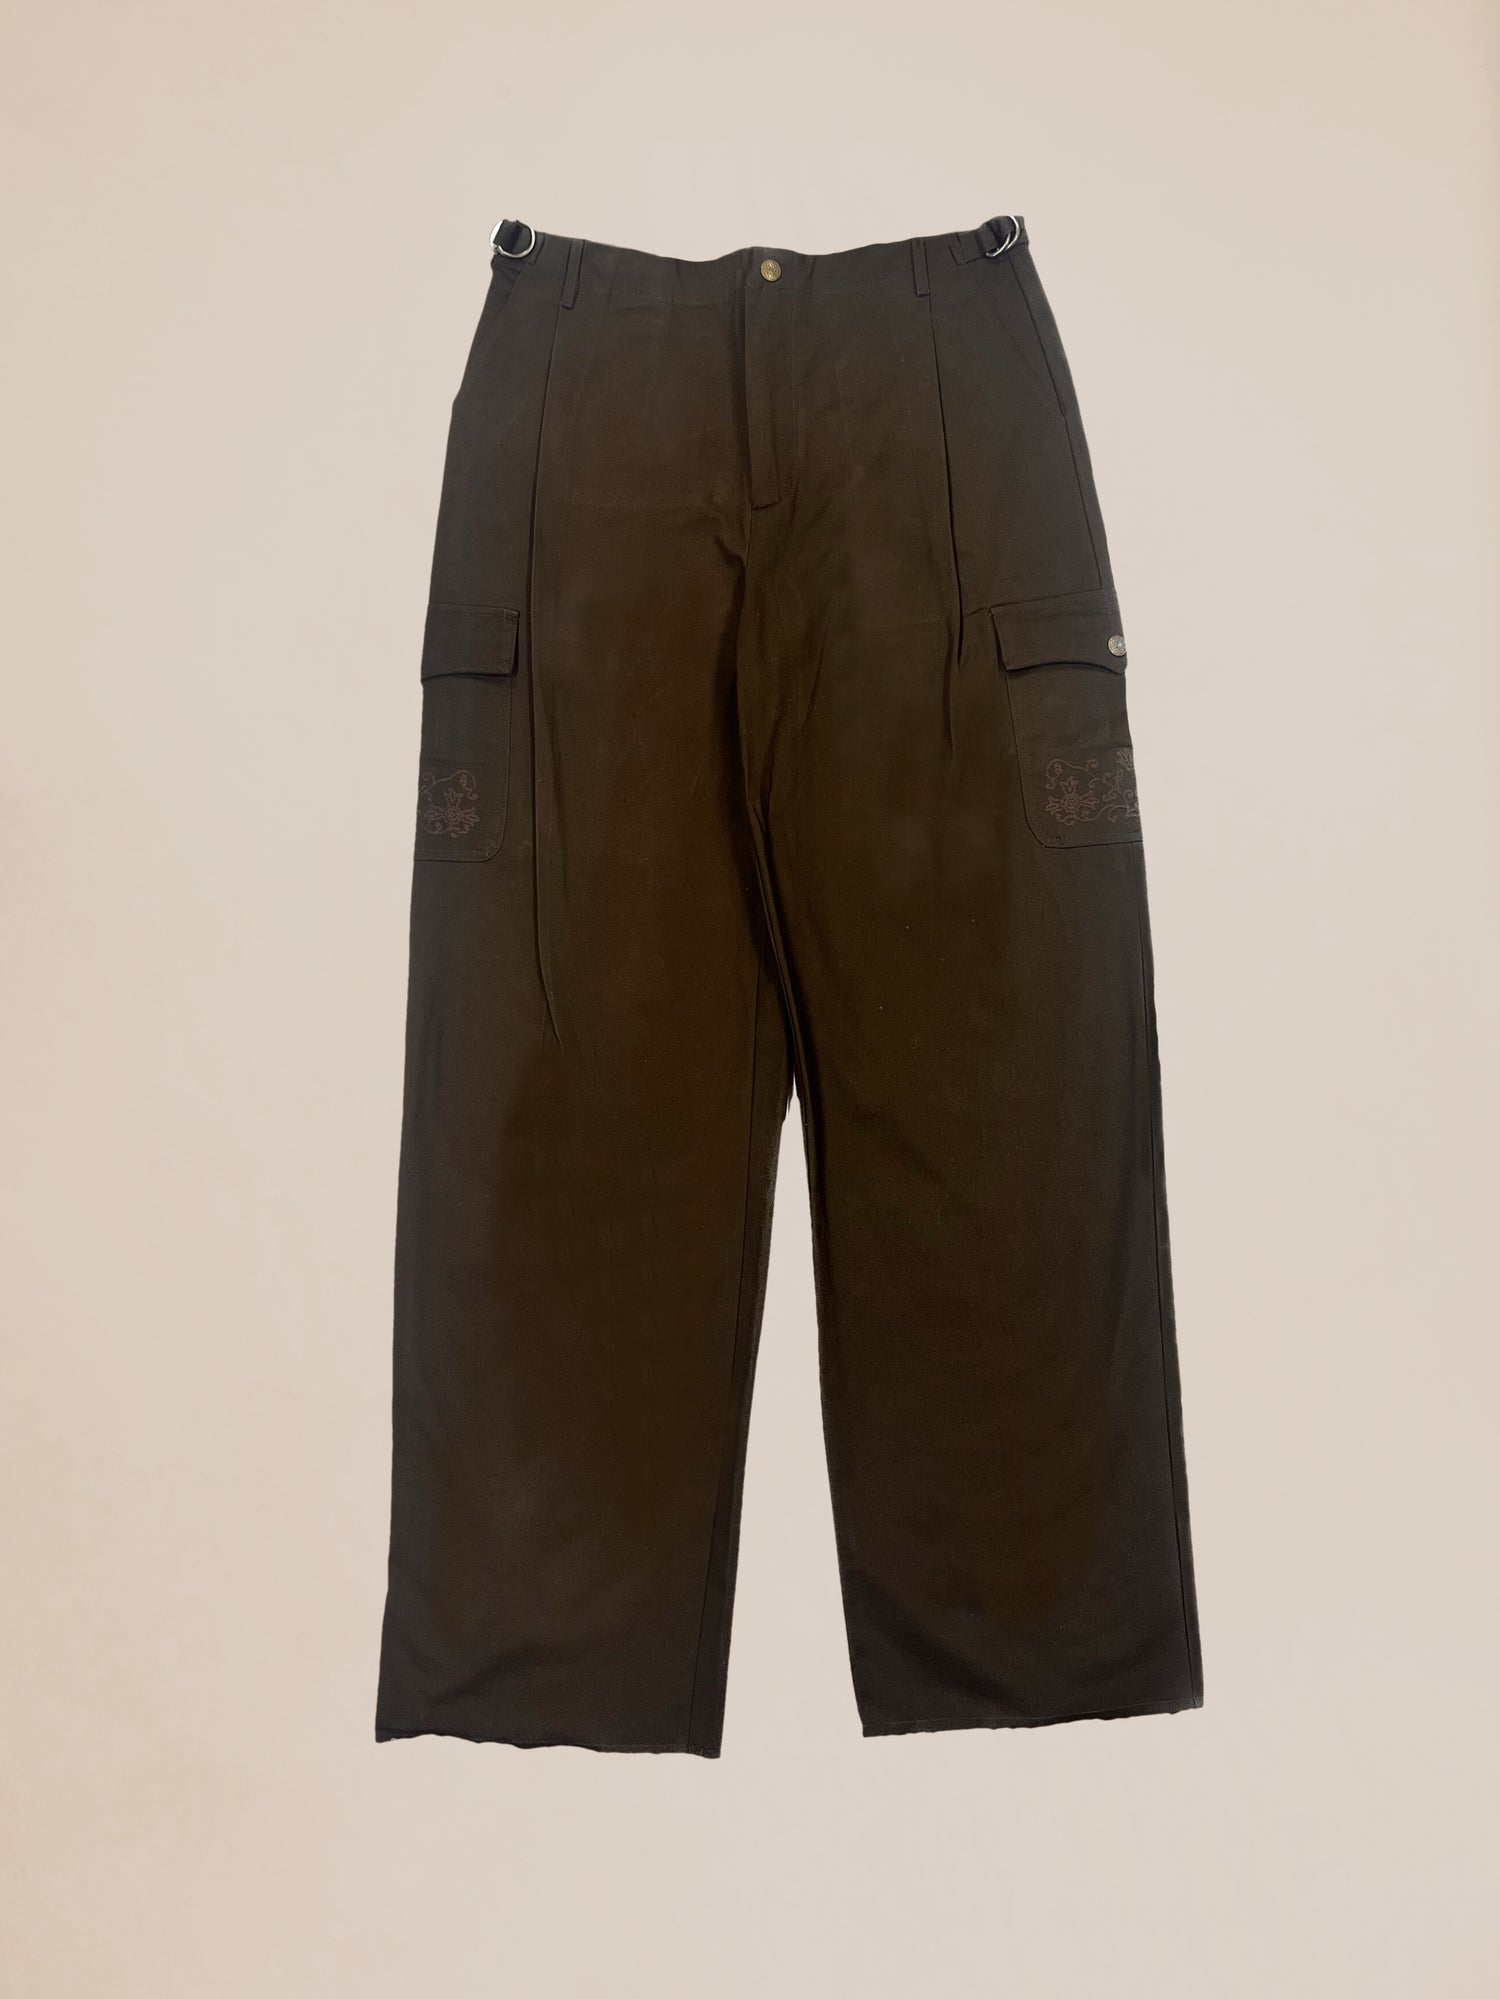 A pair of brown wide-legged cotton pants with decorative pockets on a neutral background - Profound's Sample 9 Western Cargo Jeans.